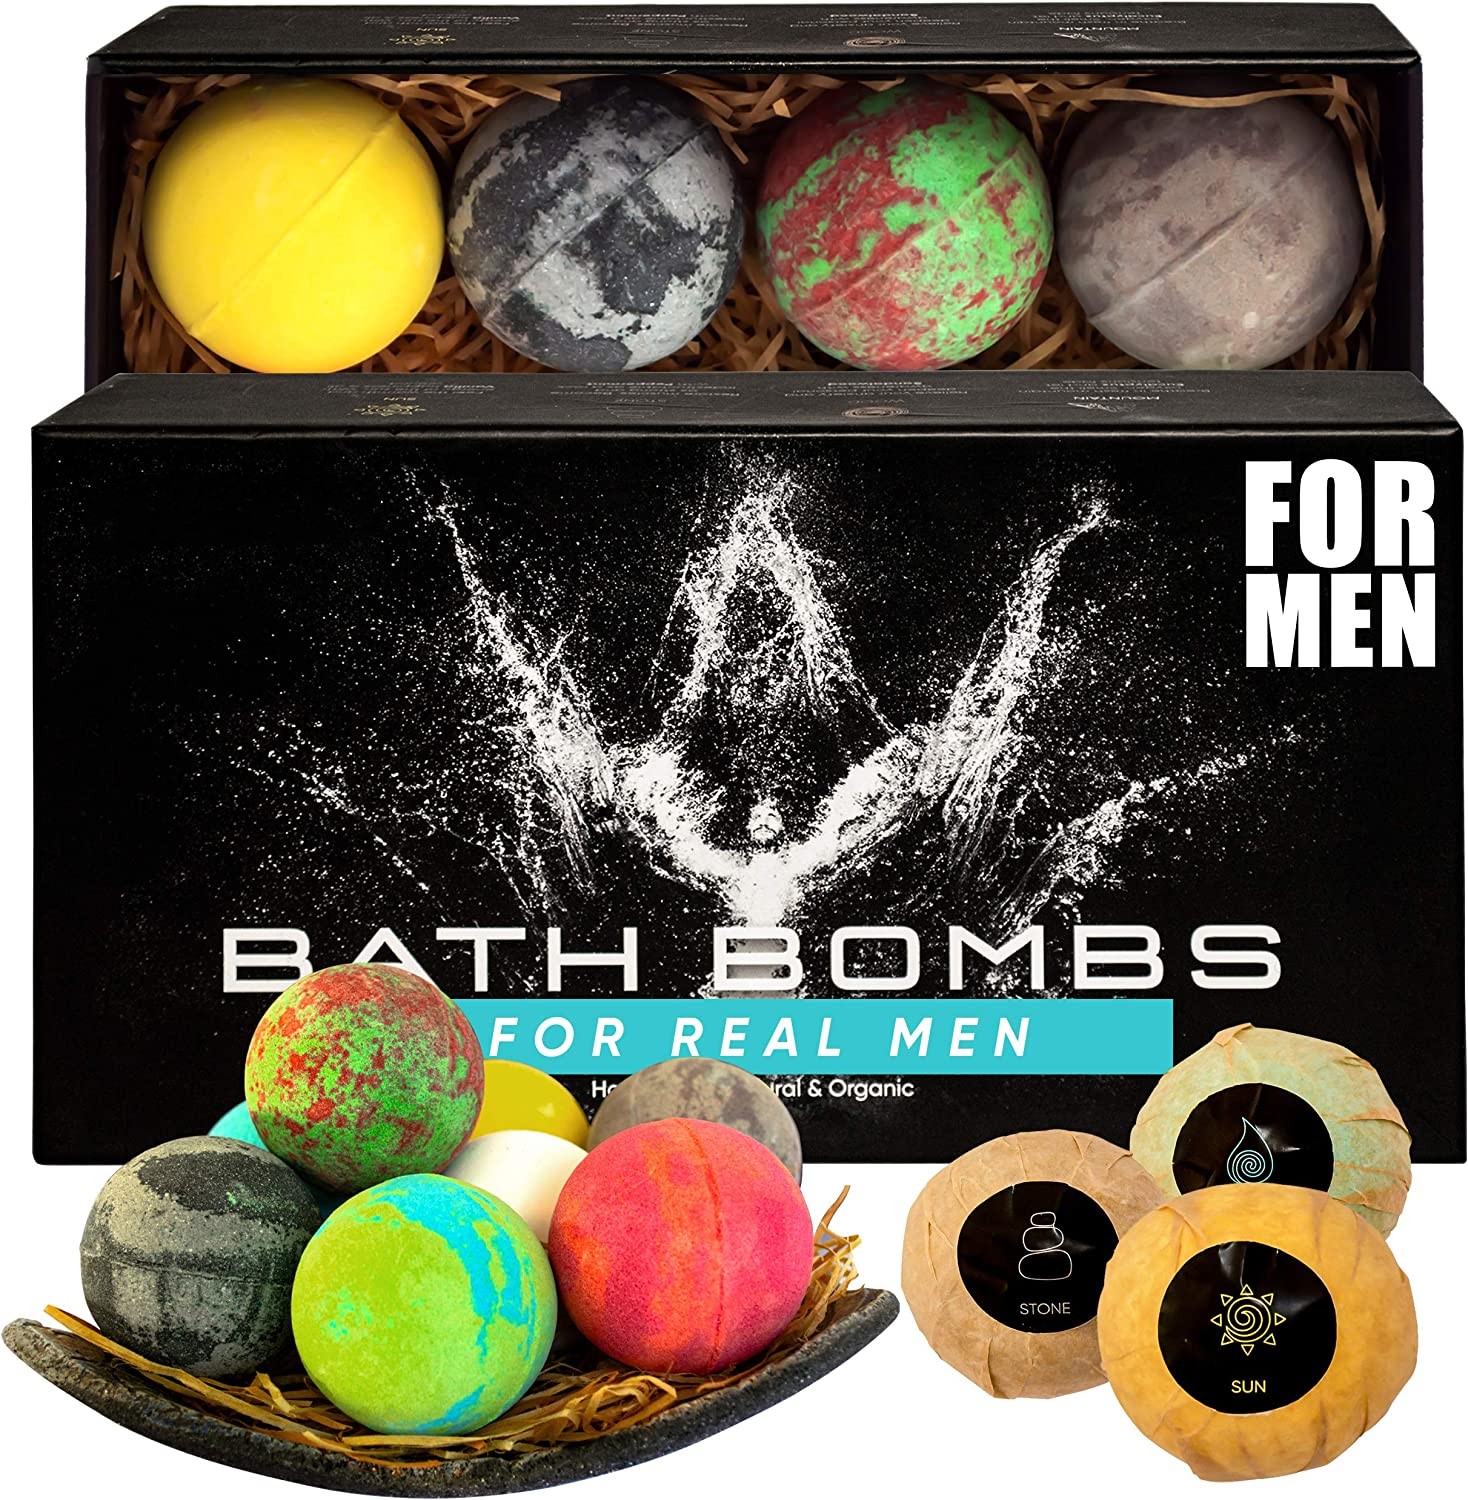 Gift Set Of 6 Scenteds Bath Bombs For Men